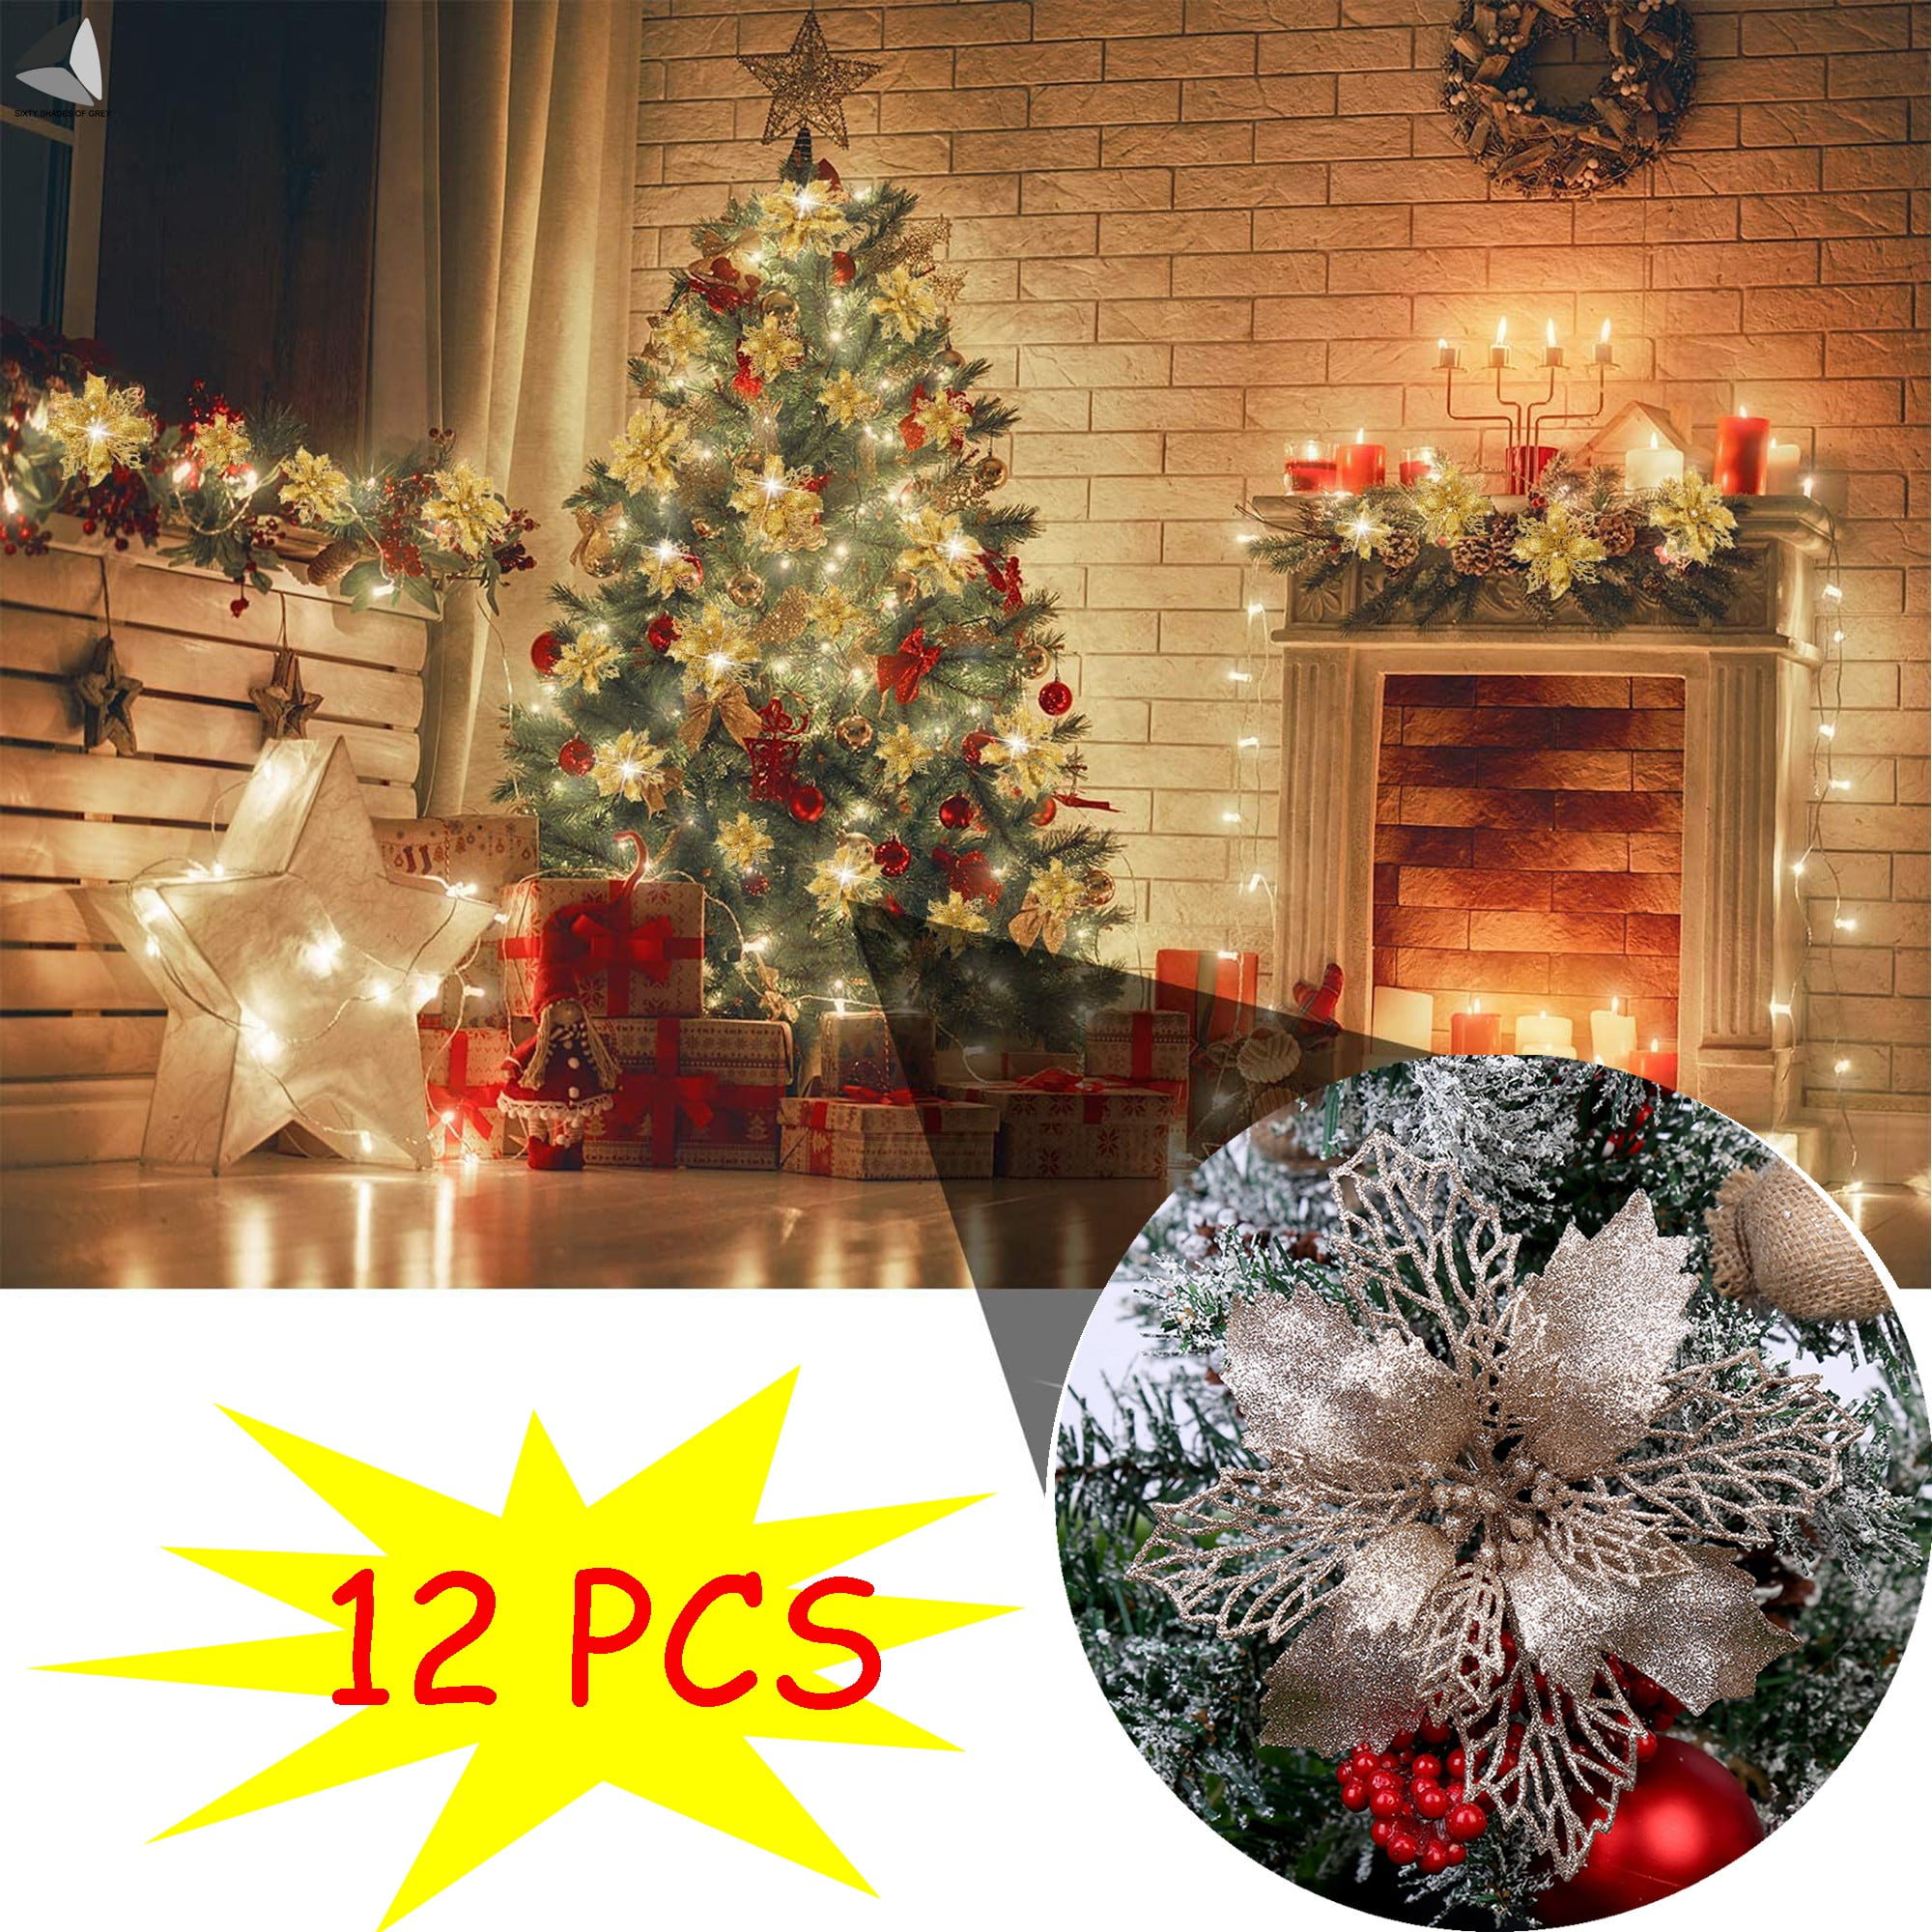 Zhenrui 12 pcs 6” Christmas Poinsettia Flower Glitter Poinsettia Tree Ornaments with Stems Champagne Artificial Flower Decorating Wreath Garland Great for Wedding Holiday and Home Decor